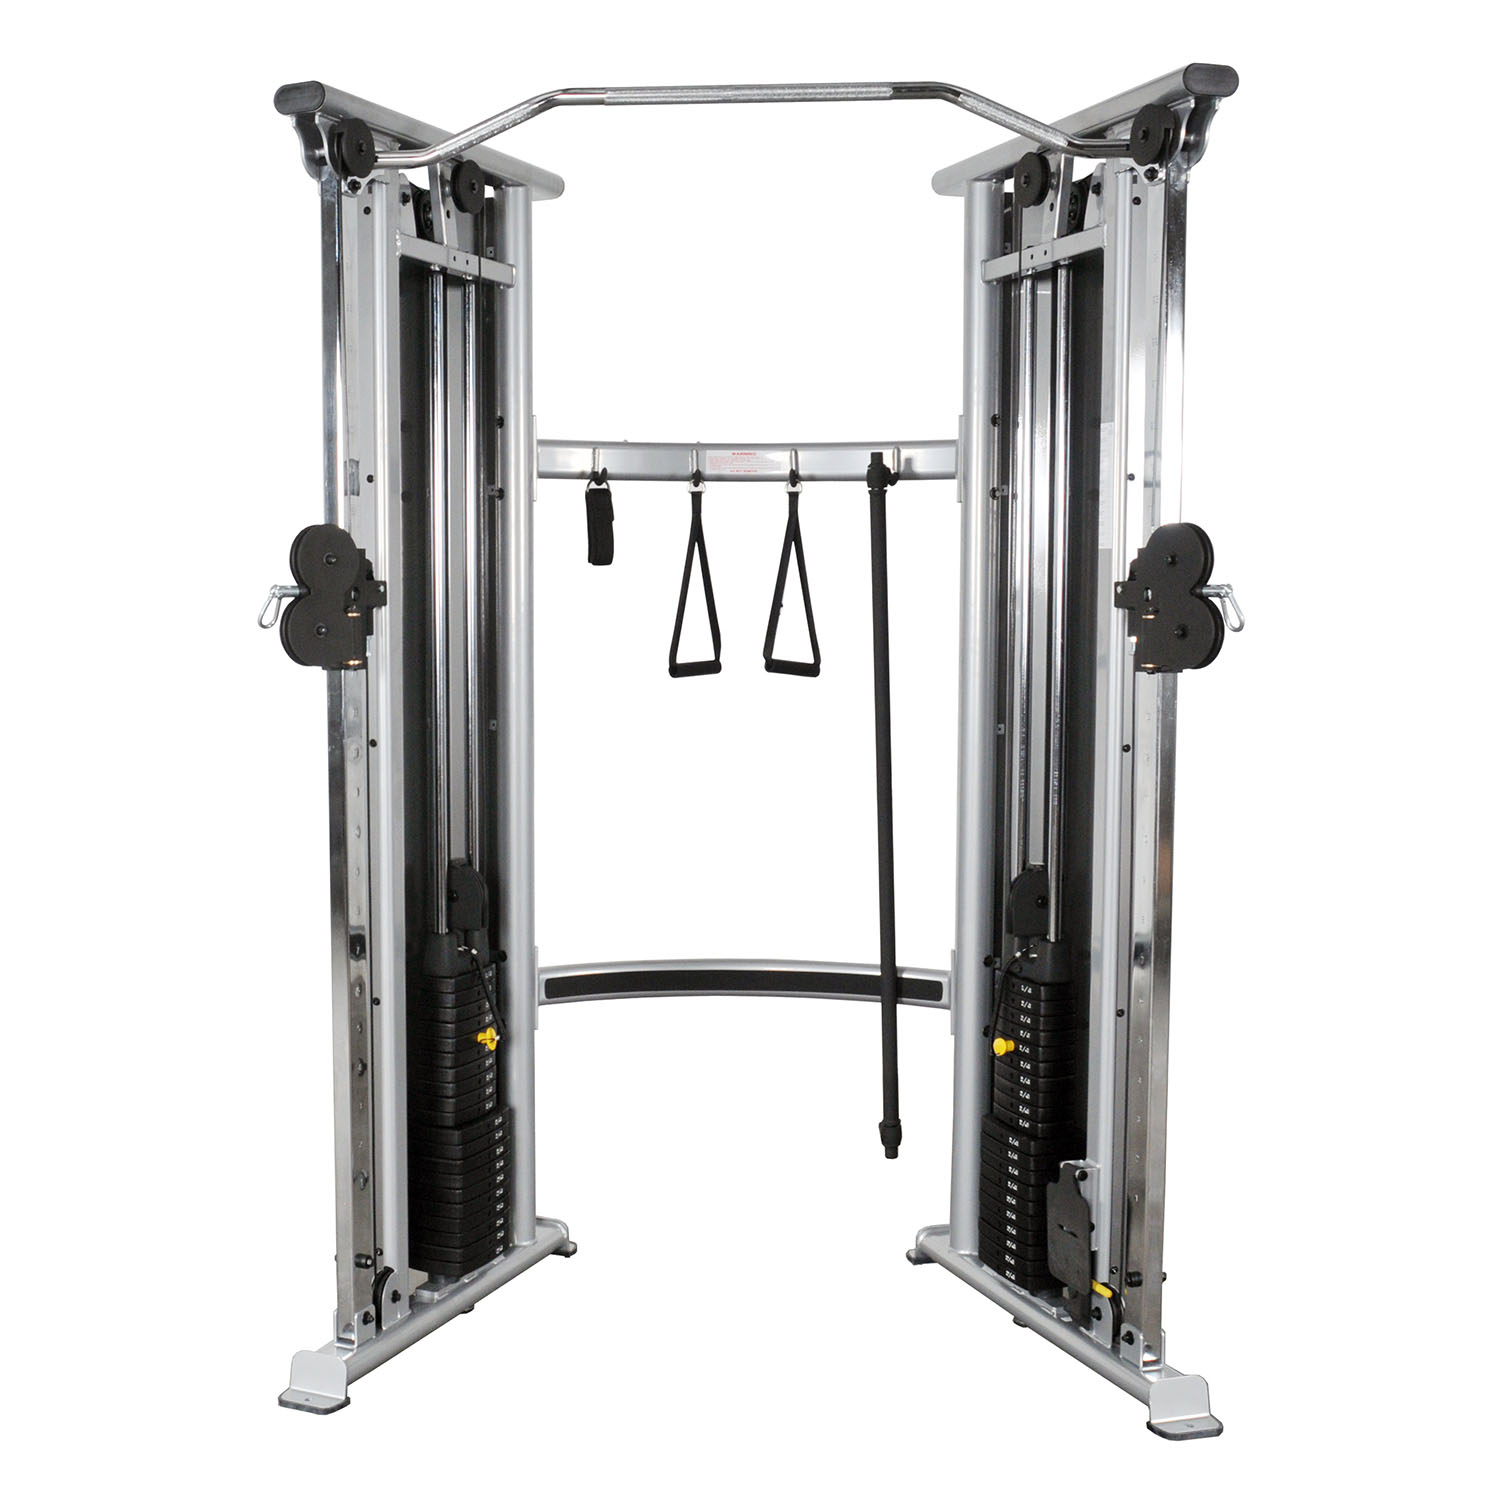 INFLIGHT FT 1000S FITNESS FUNCTIONAL TRAINER. Call Now For Lowest Price In USA